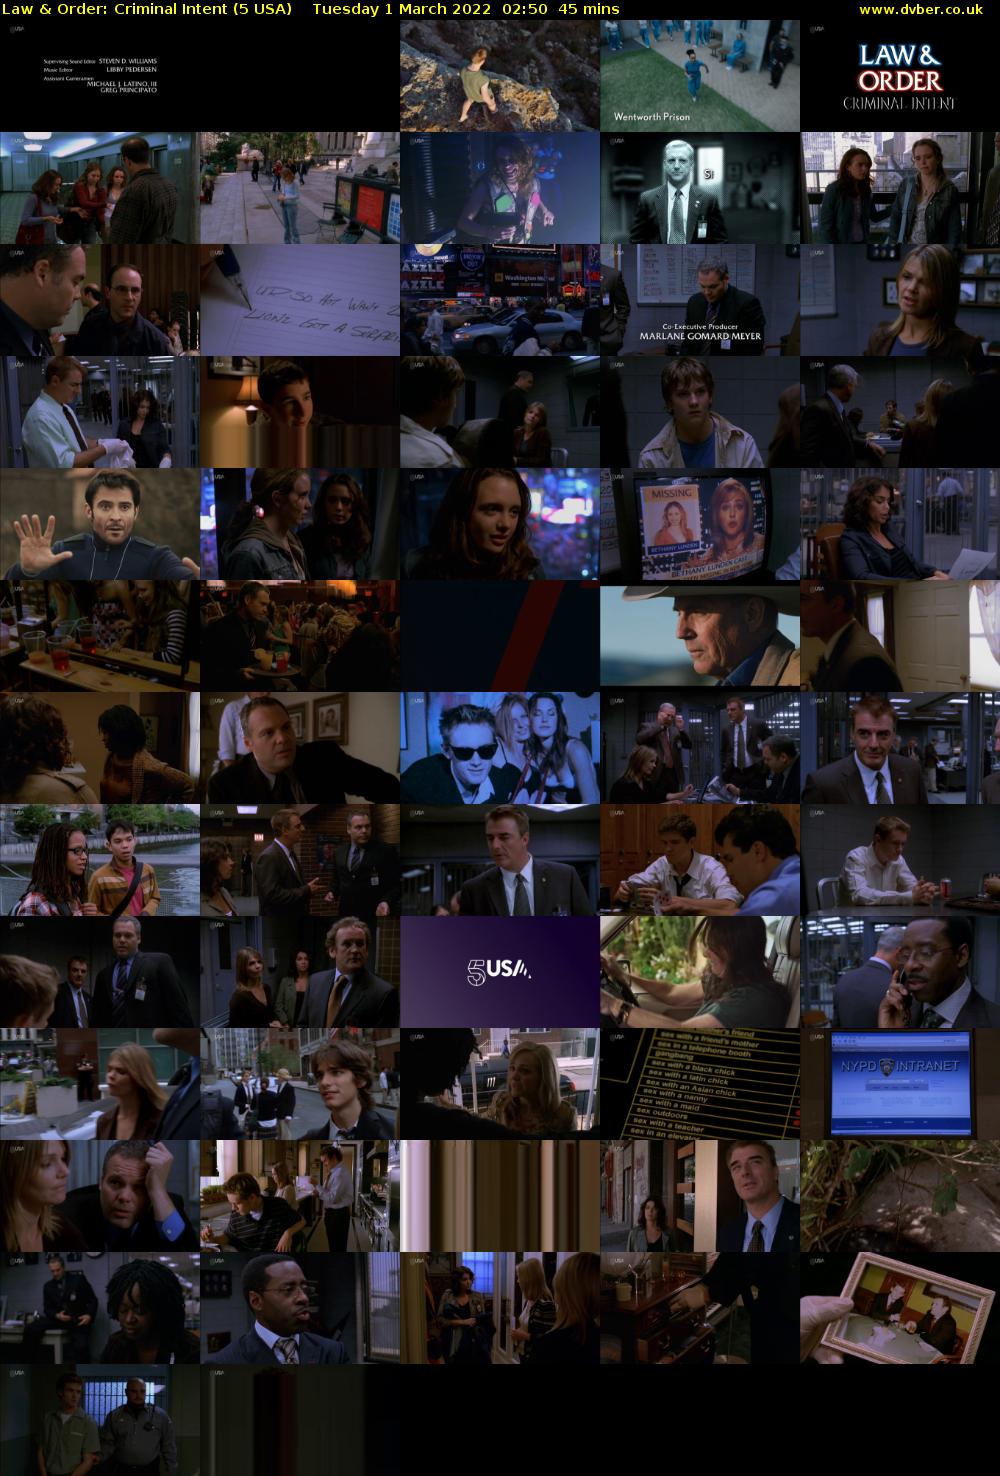 Law & Order: Criminal Intent (5 USA) Tuesday 1 March 2022 02:50 - 03:35